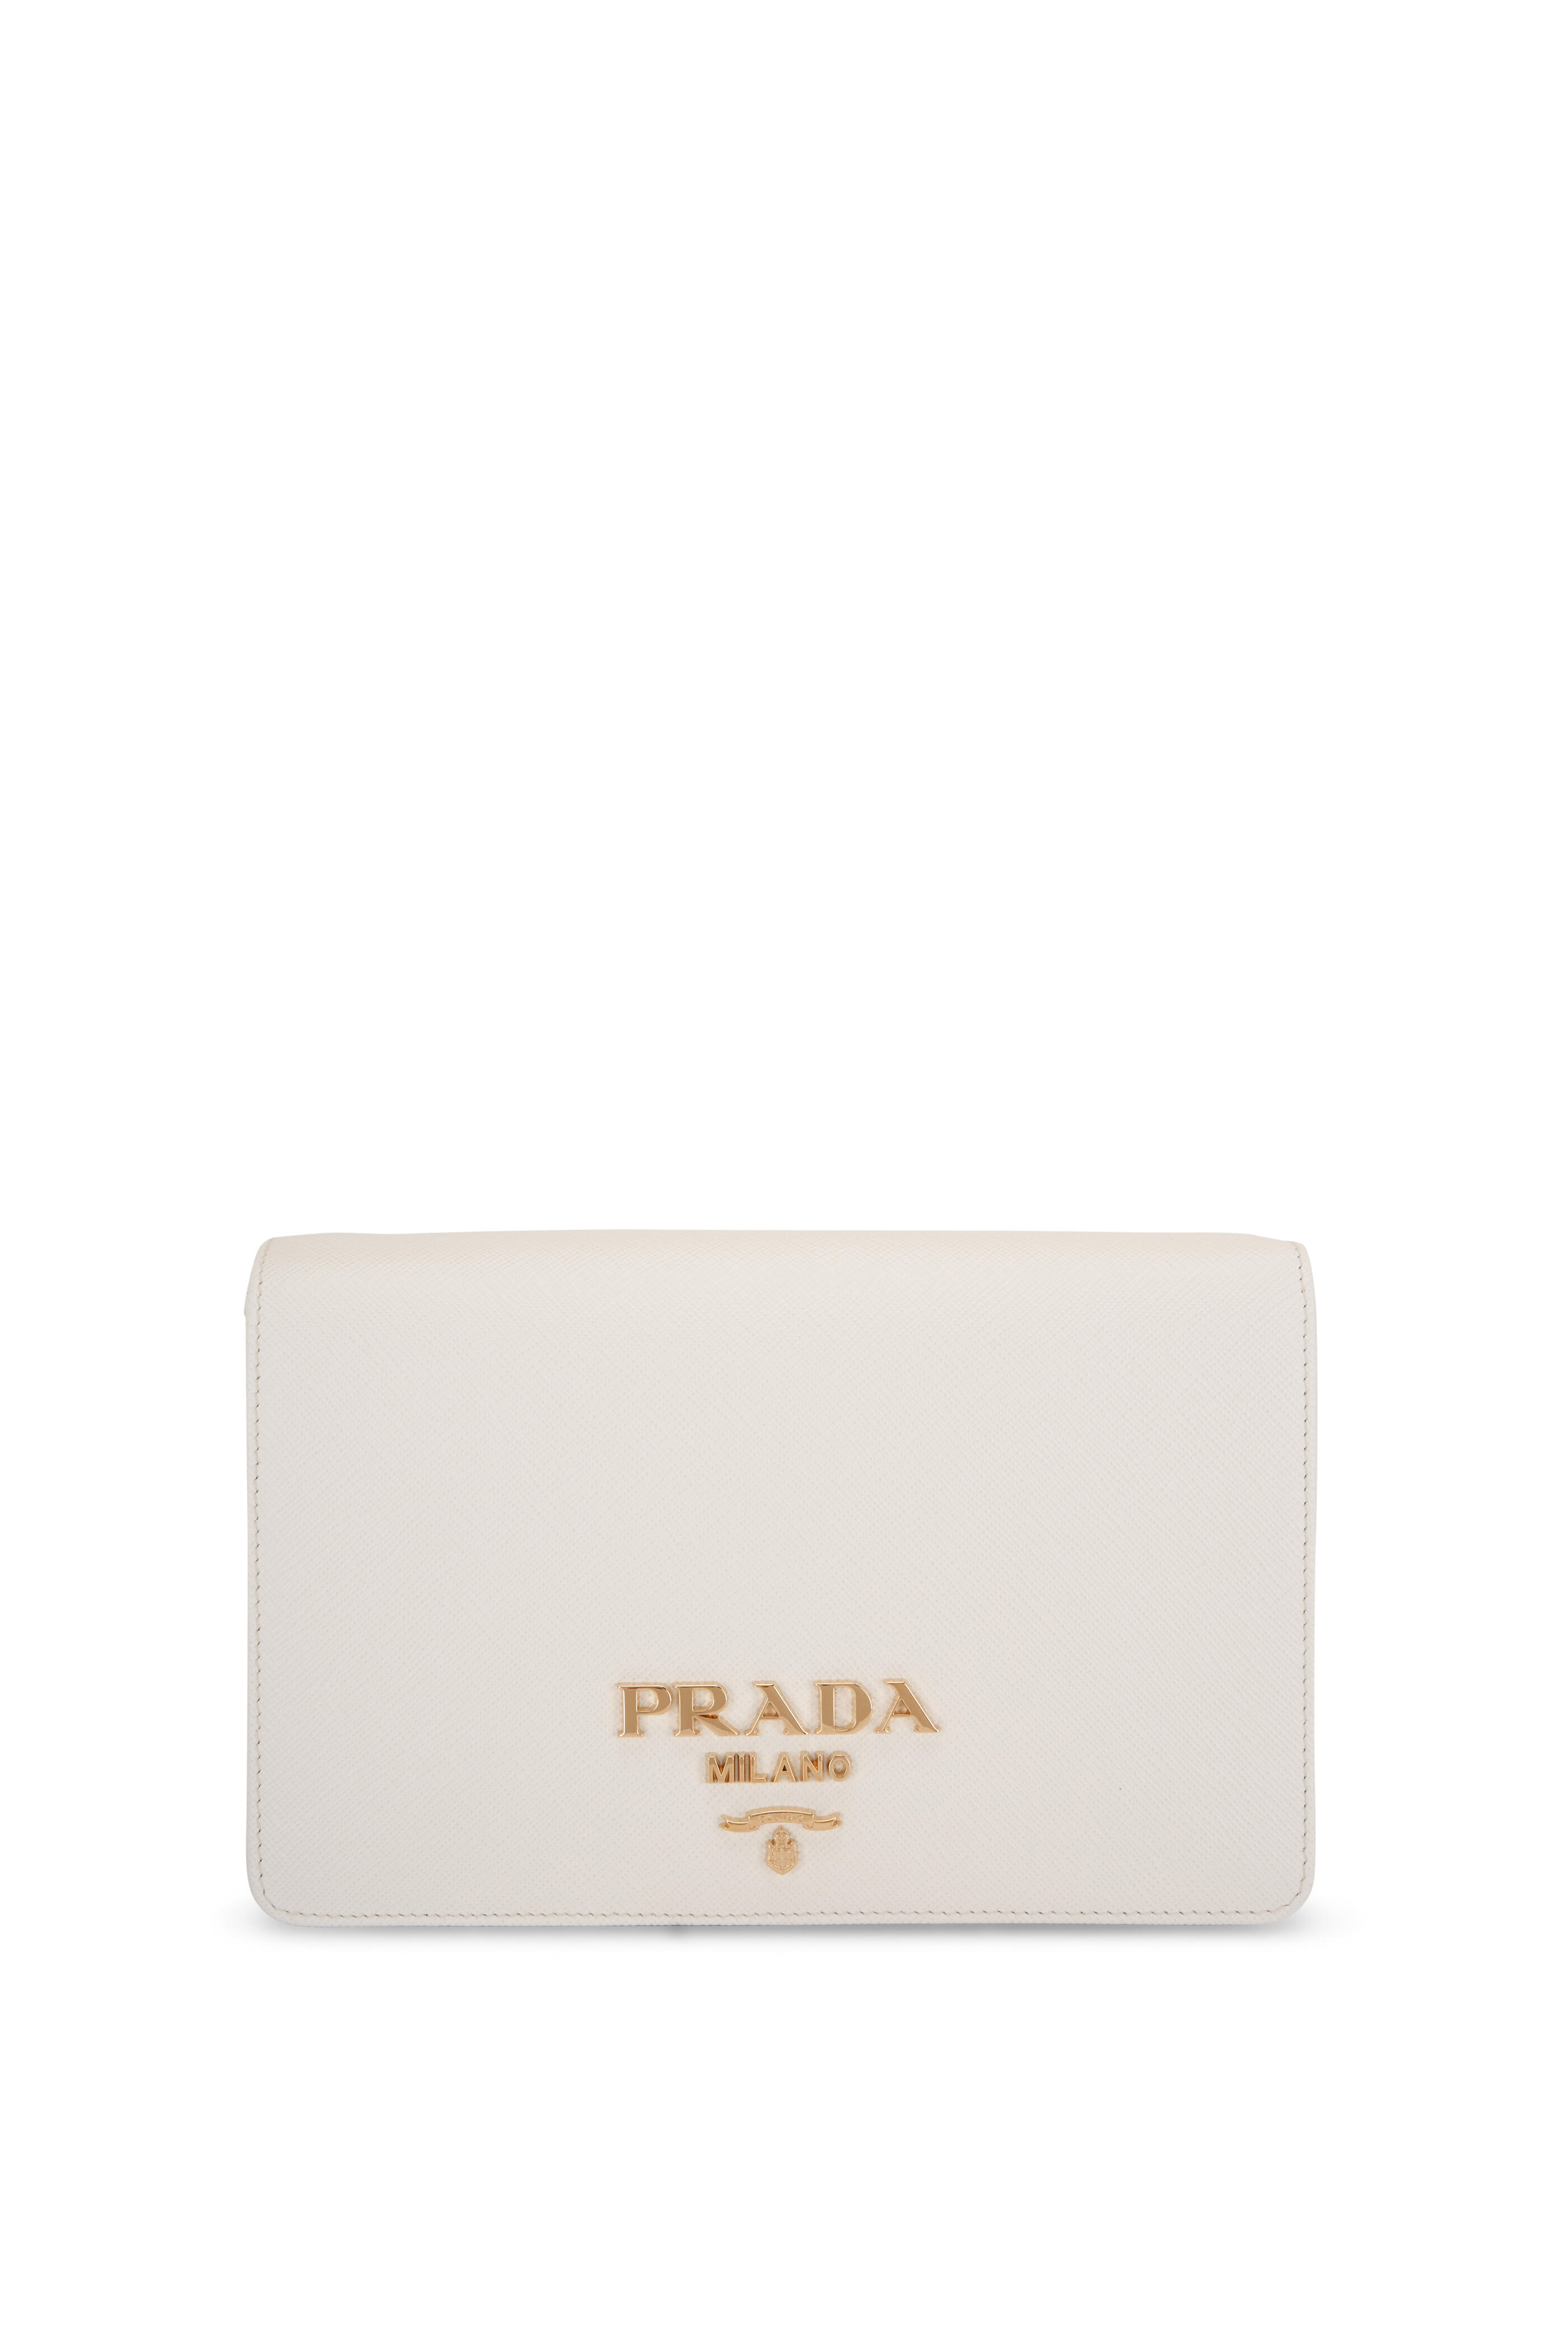 Prada Women's Cipria Saffiano Leather Snap Wallet | by Mitchell Stores